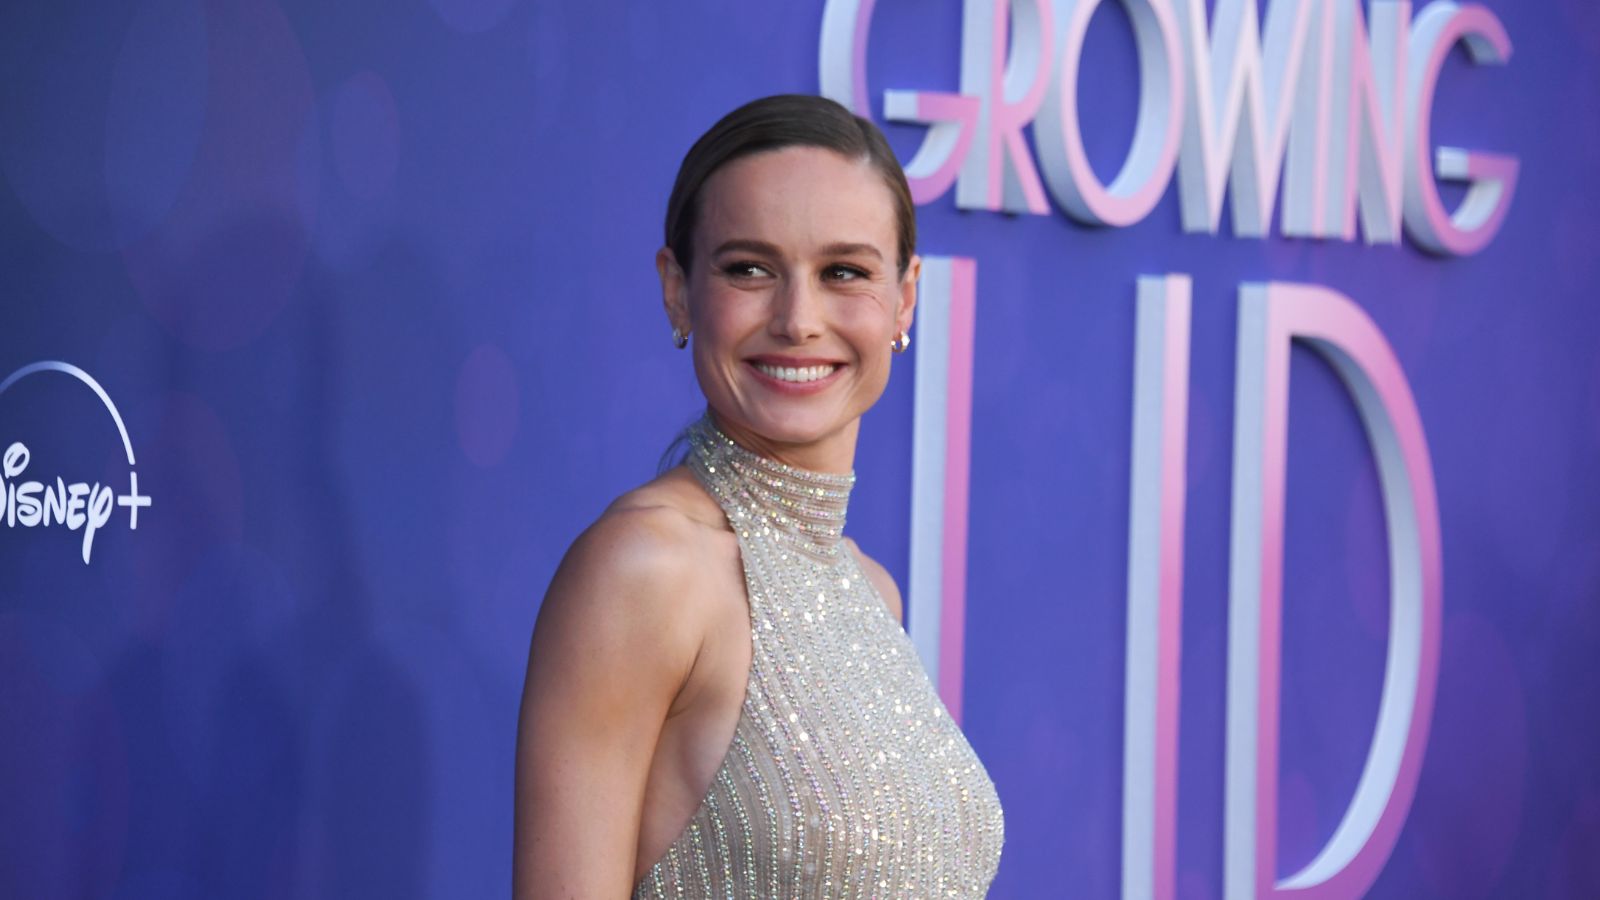 Brie Larson challenges the trolls to come for her.